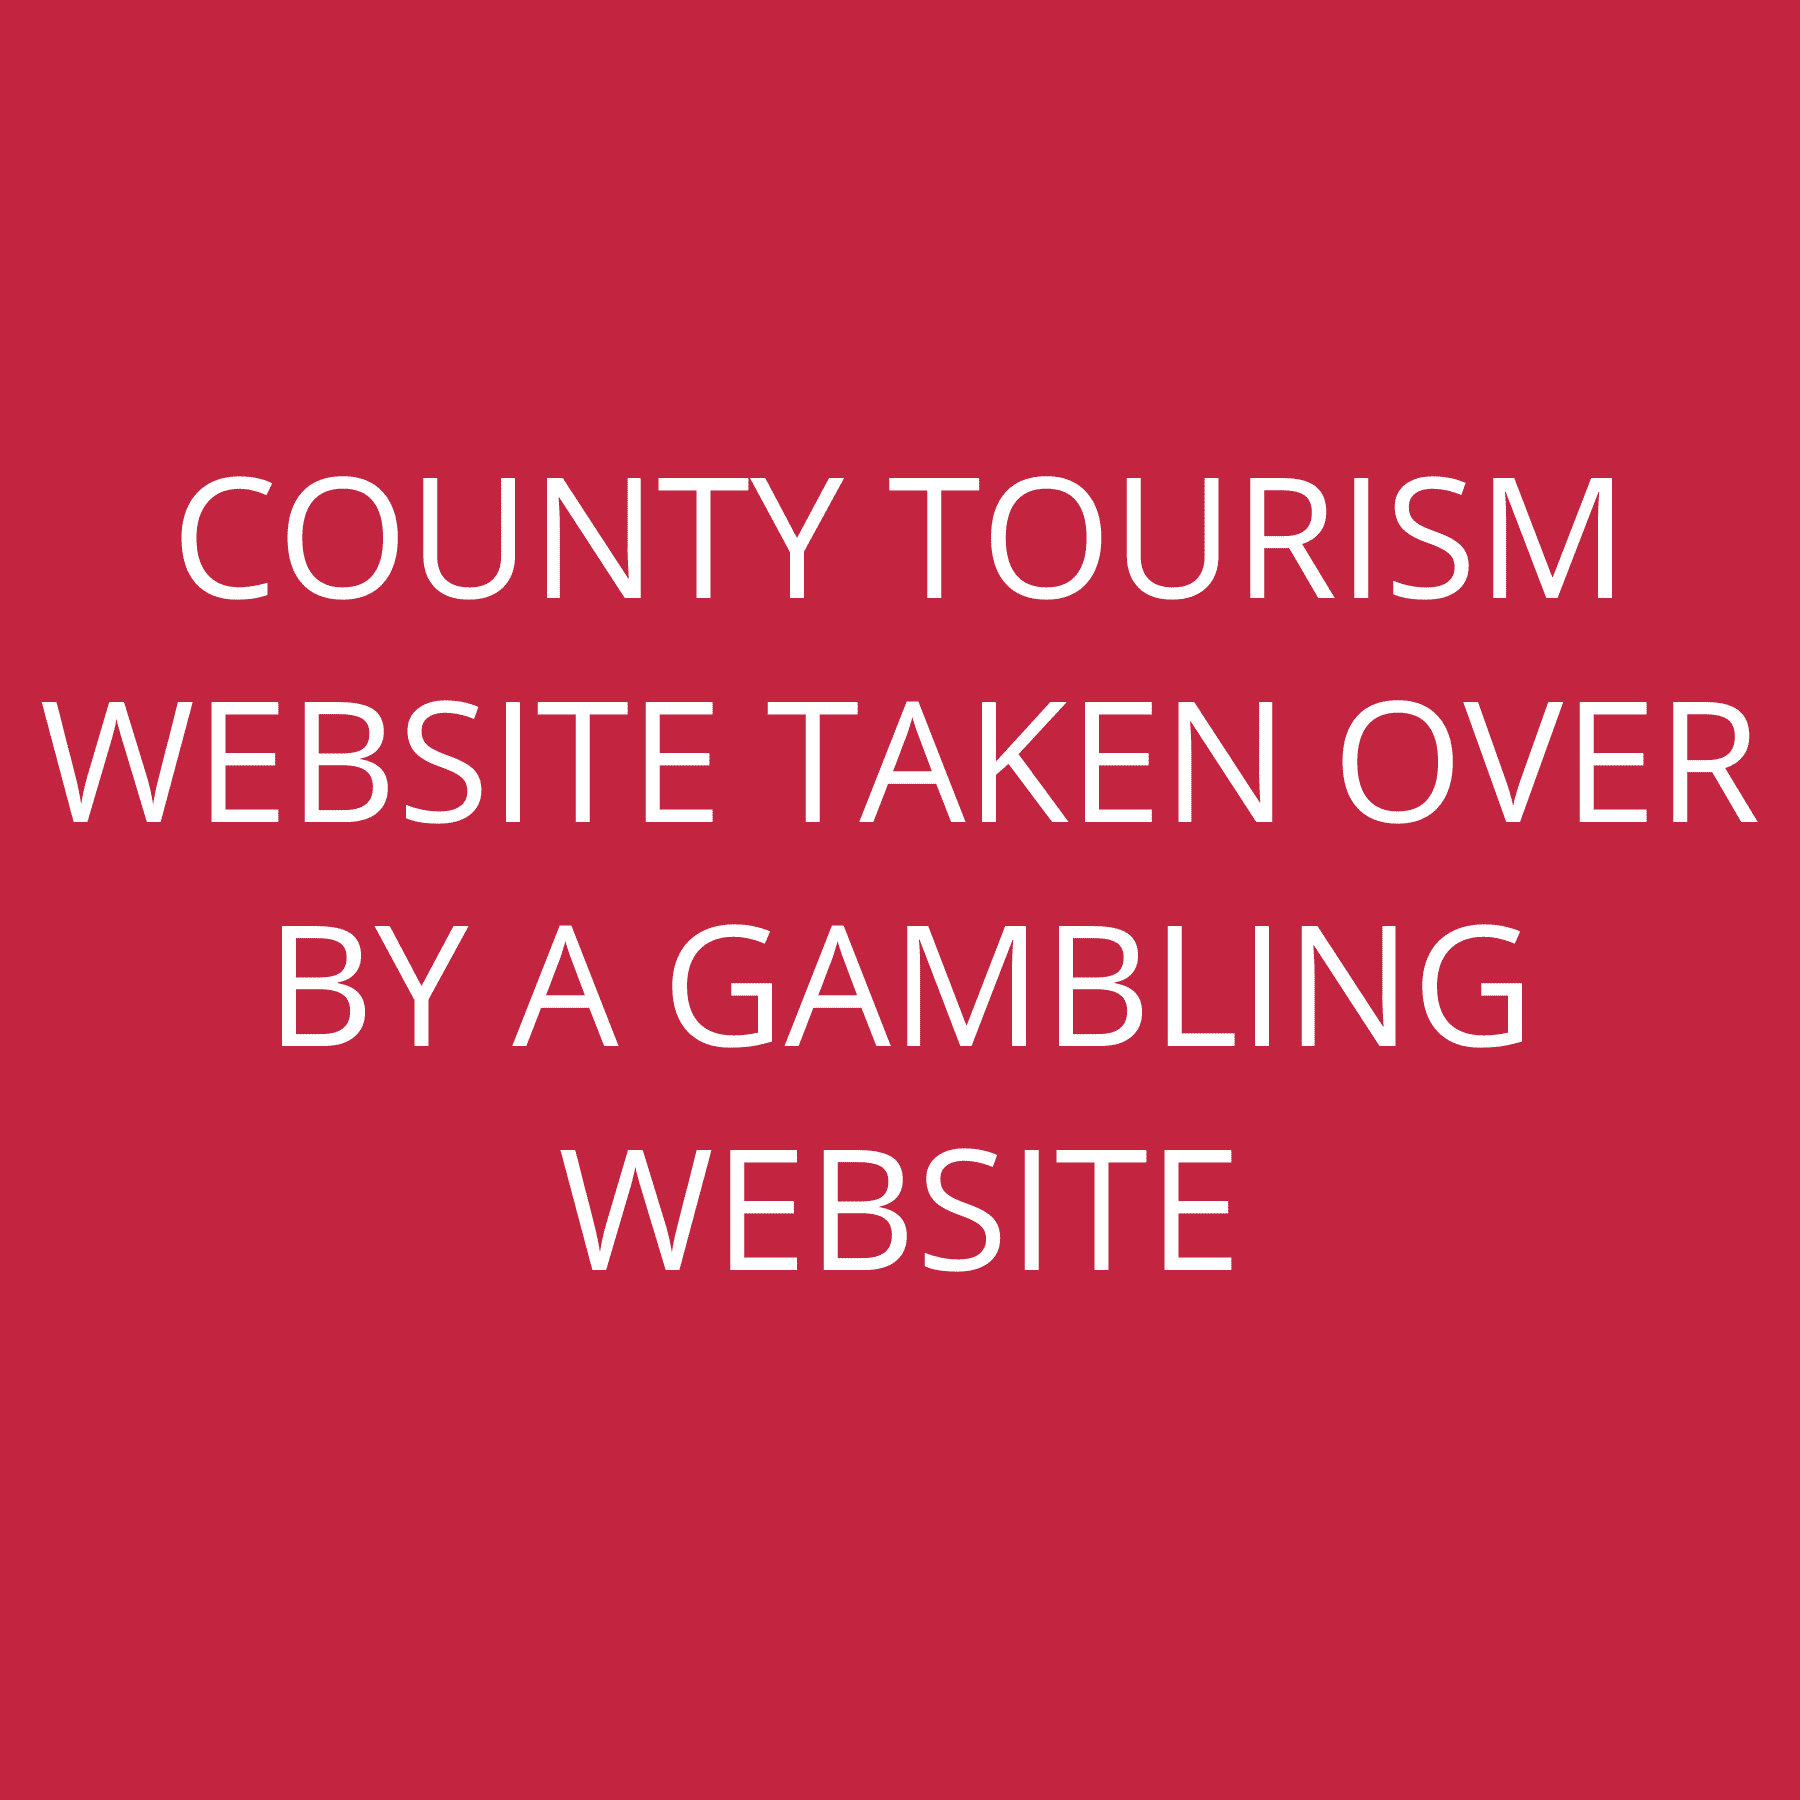 County tourism website taken over by a gambling website